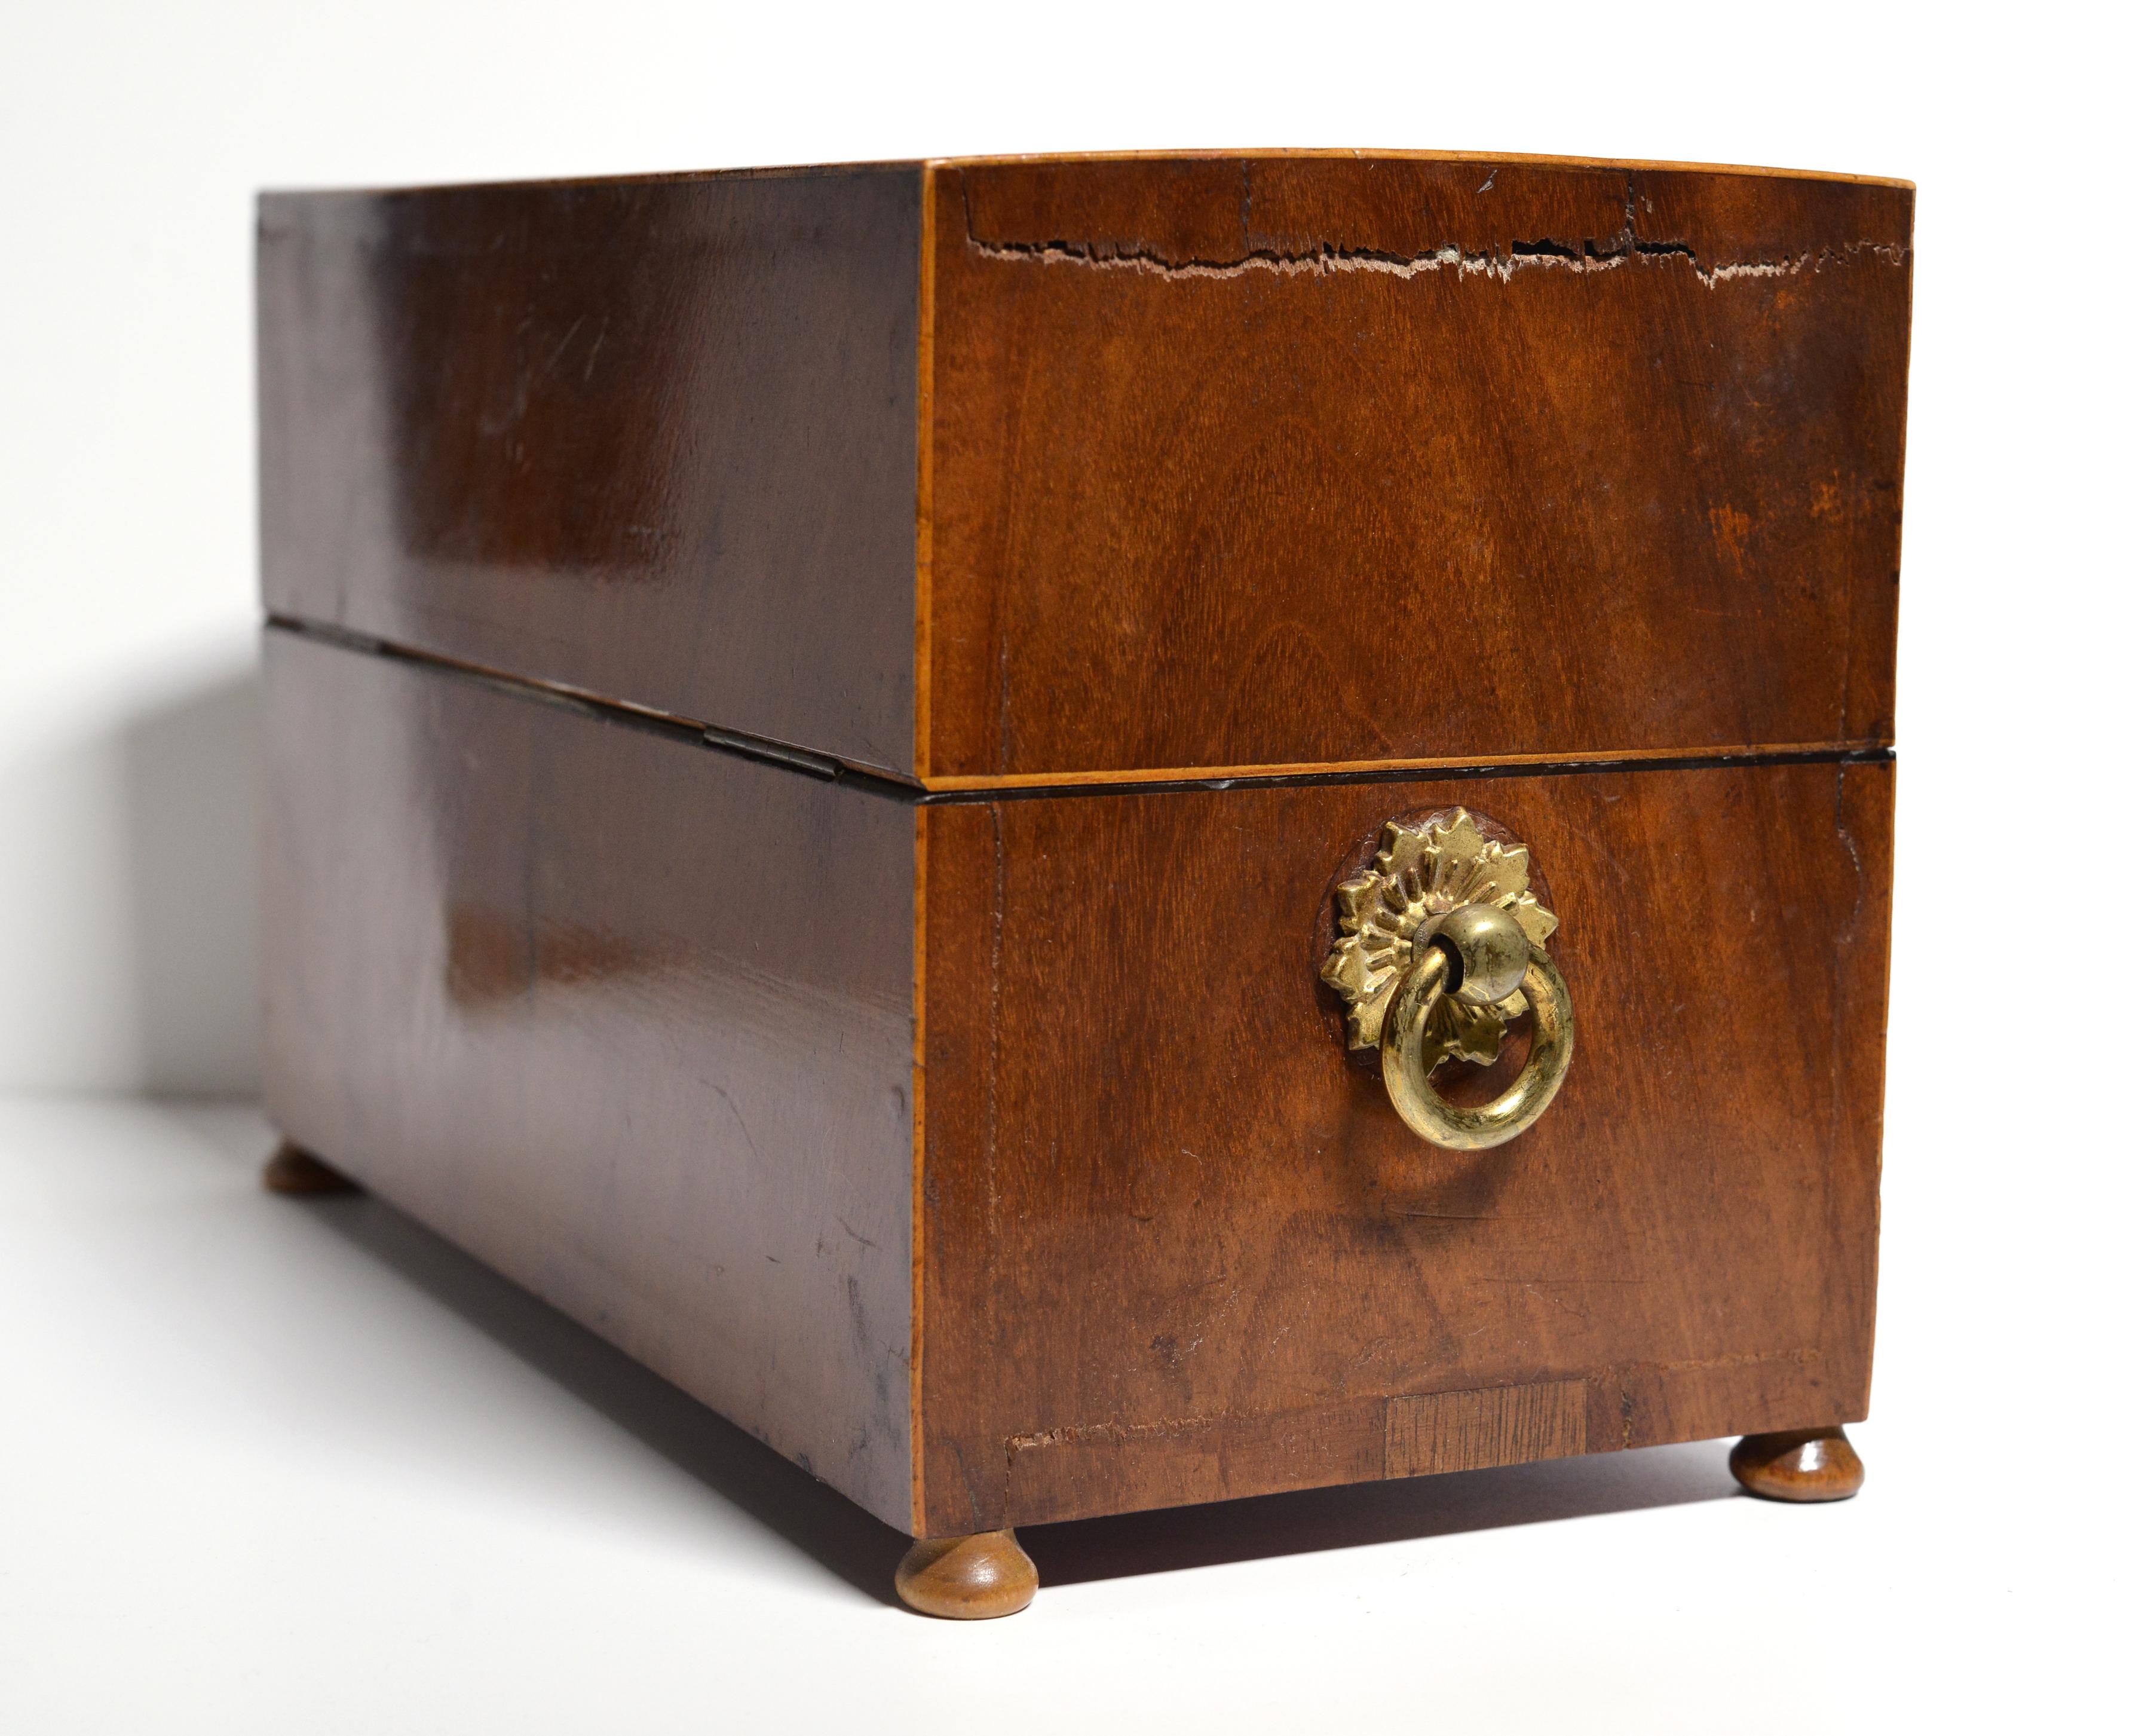 Mahogany Empire Tea Caddy Wooden Casket Box with Glass early 19th century For Sale 1